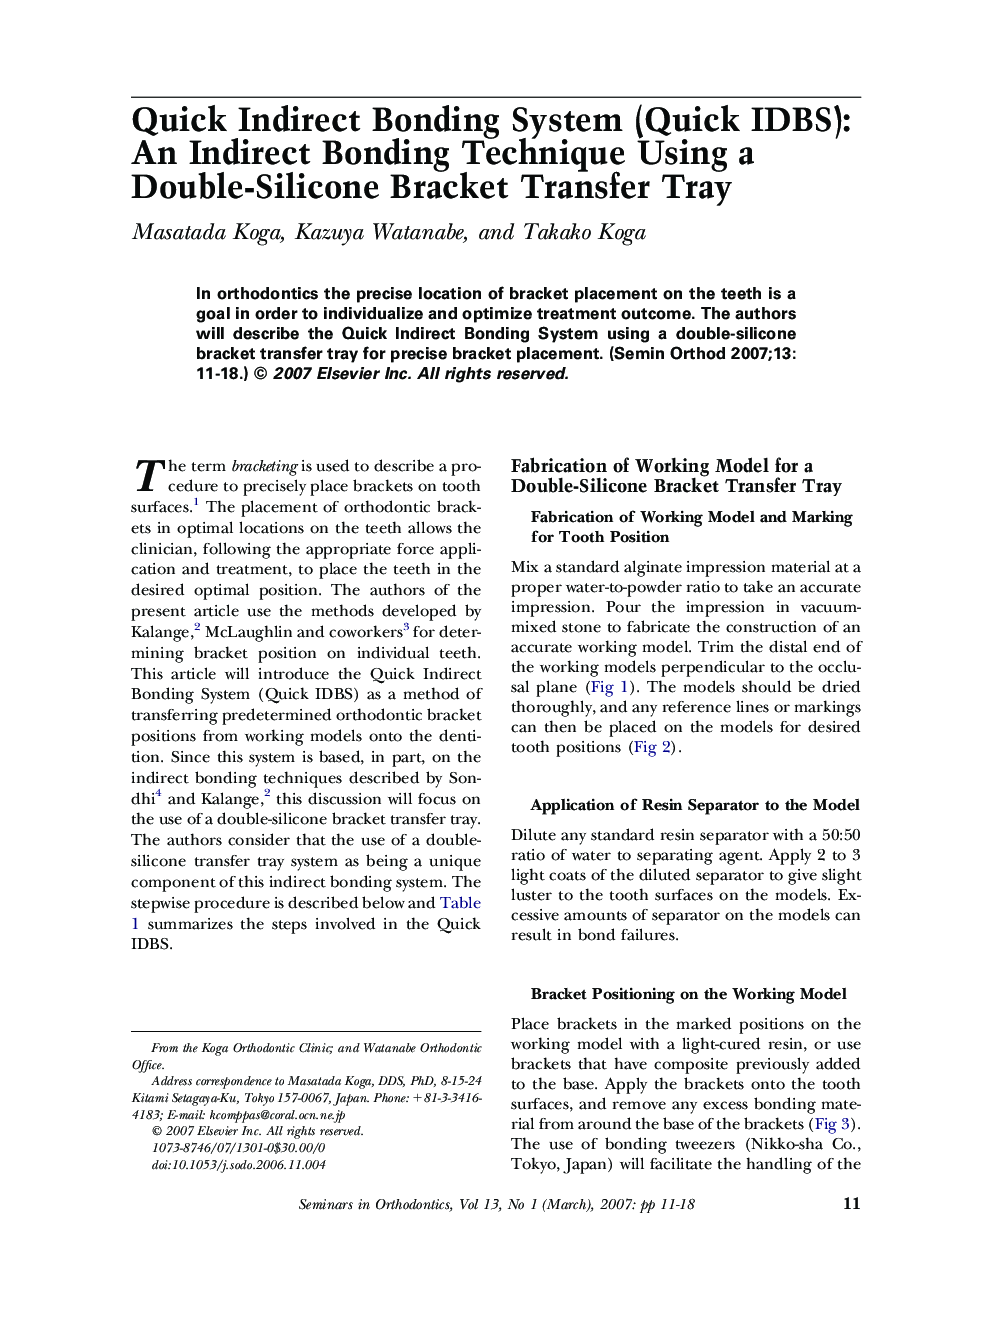 Quick Indirect Bonding System (Quick IDBS): An Indirect Bonding Technique Using a Double-Silicone Bracket Transfer Tray